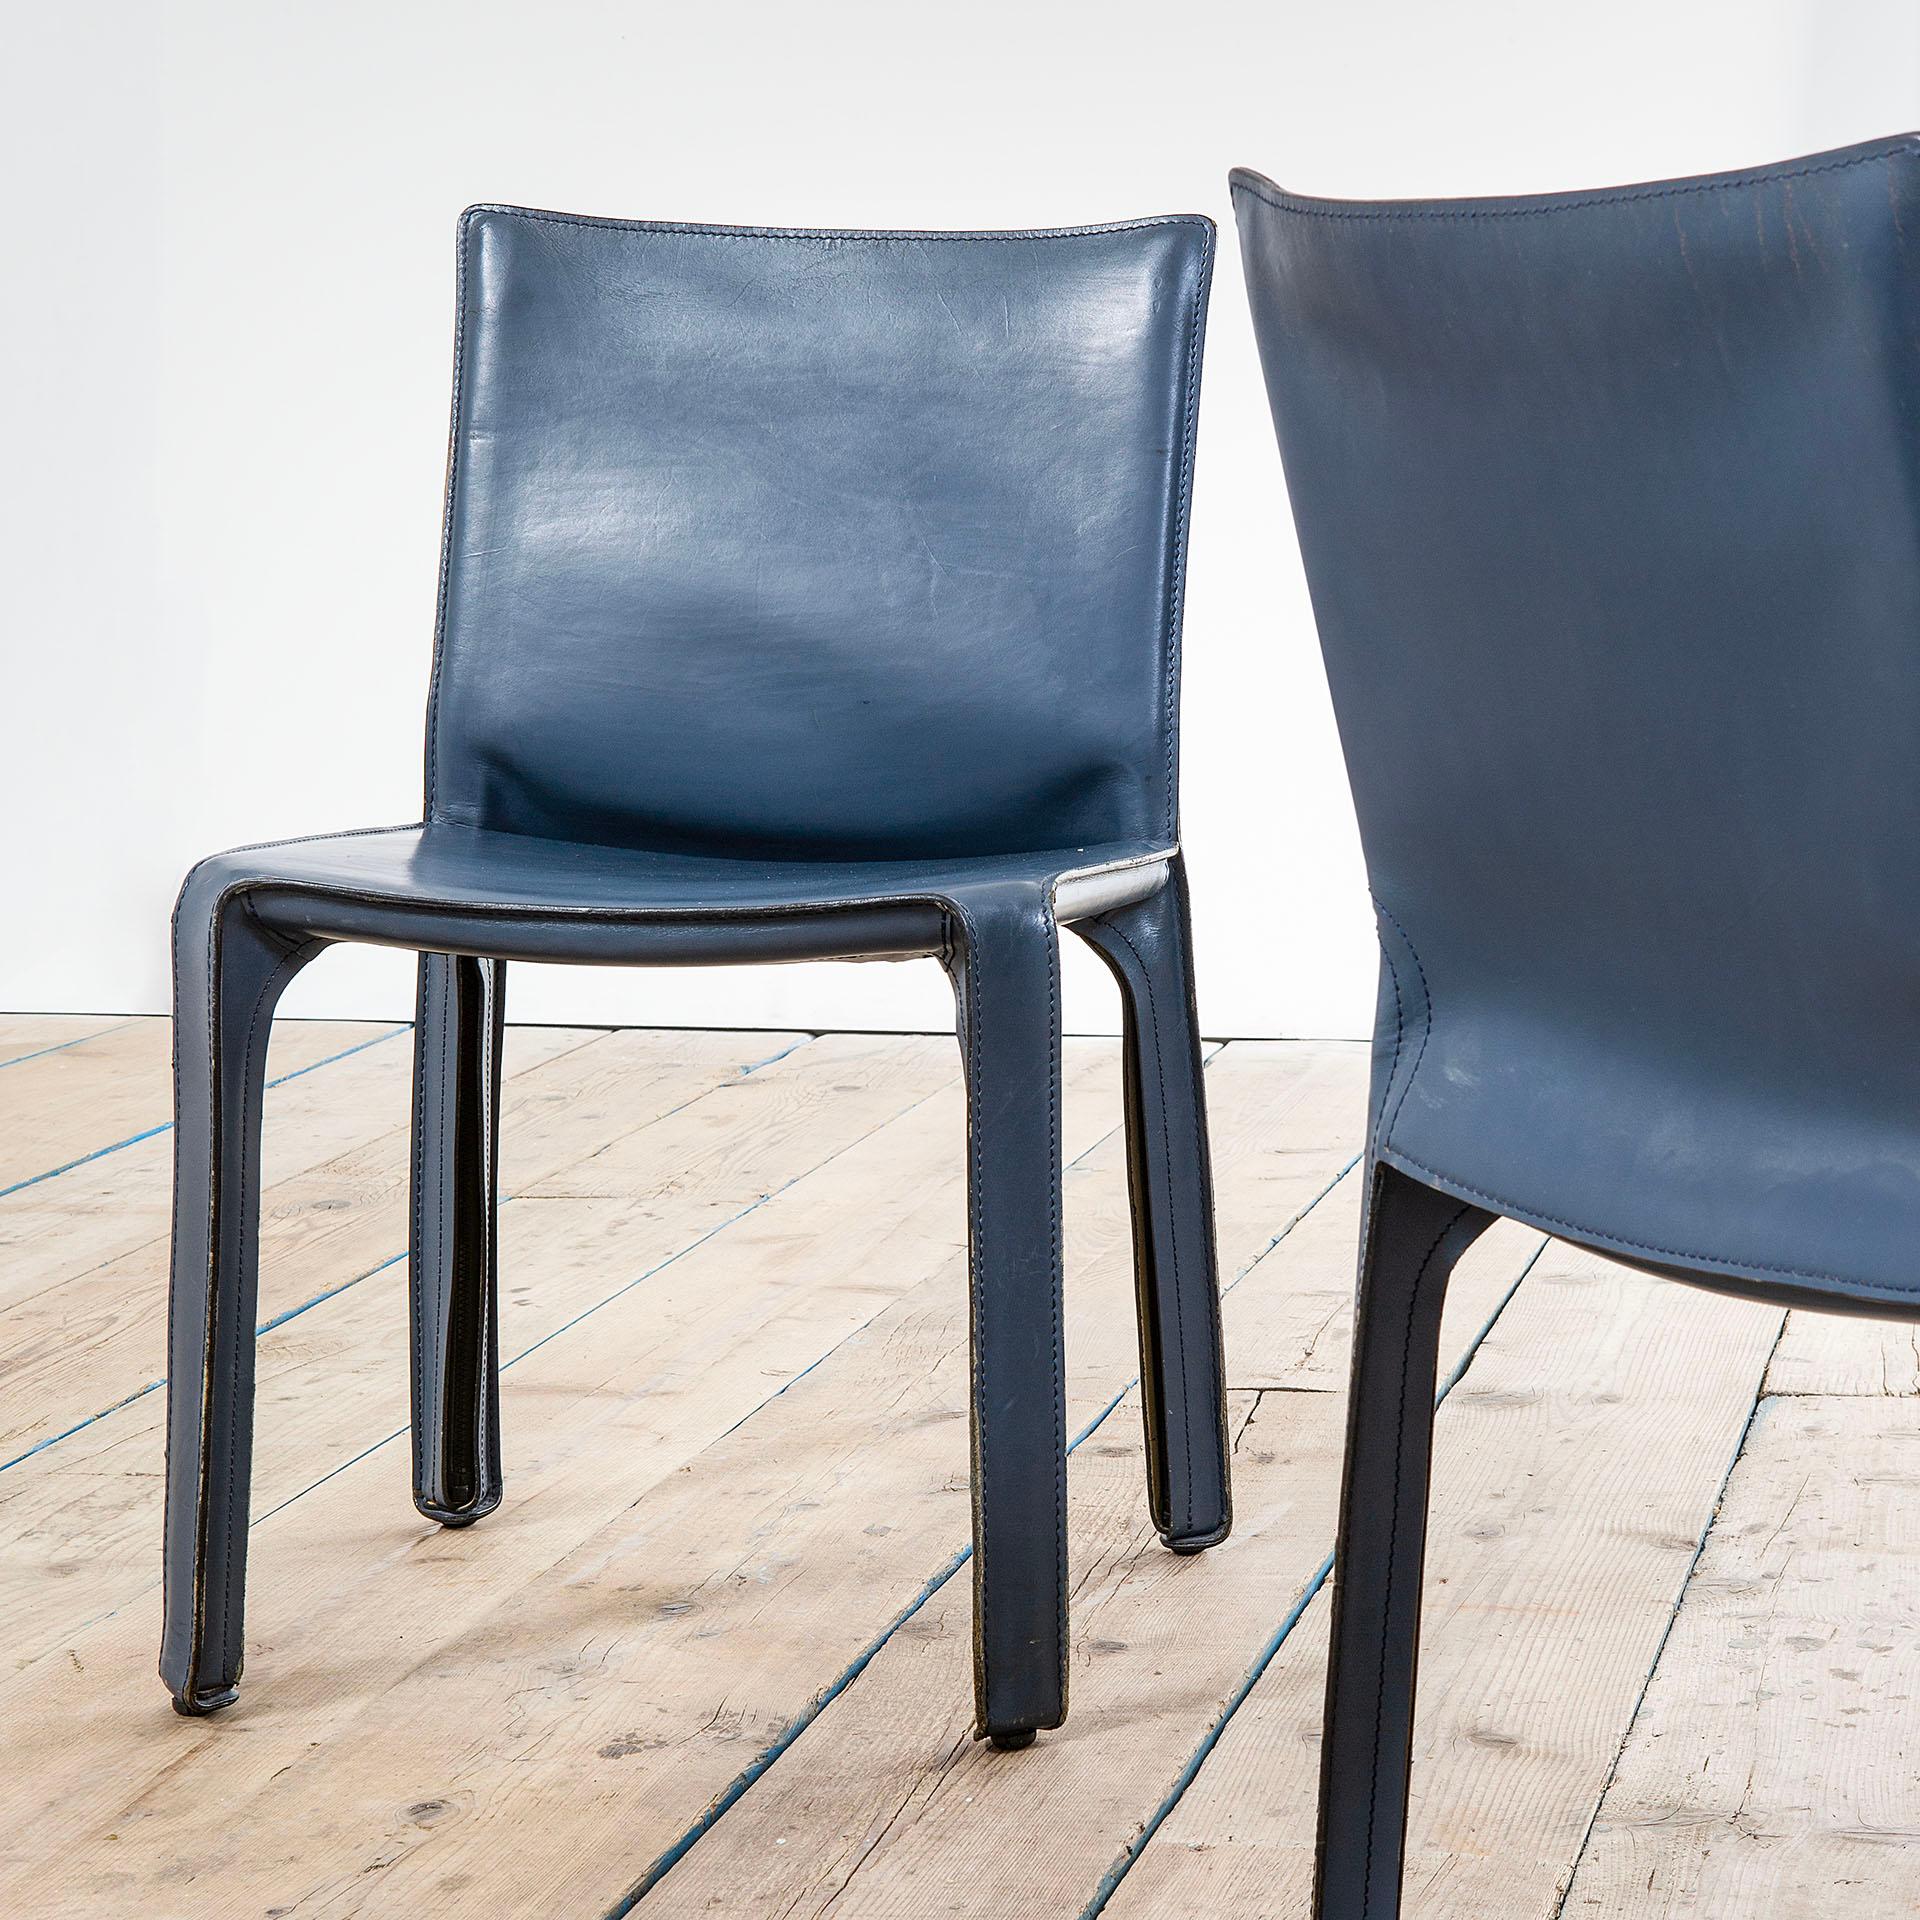 Italian 20th Century Mario Bellini Set of 4 Chairs mod. Cab in Blue for Cassina, 70s